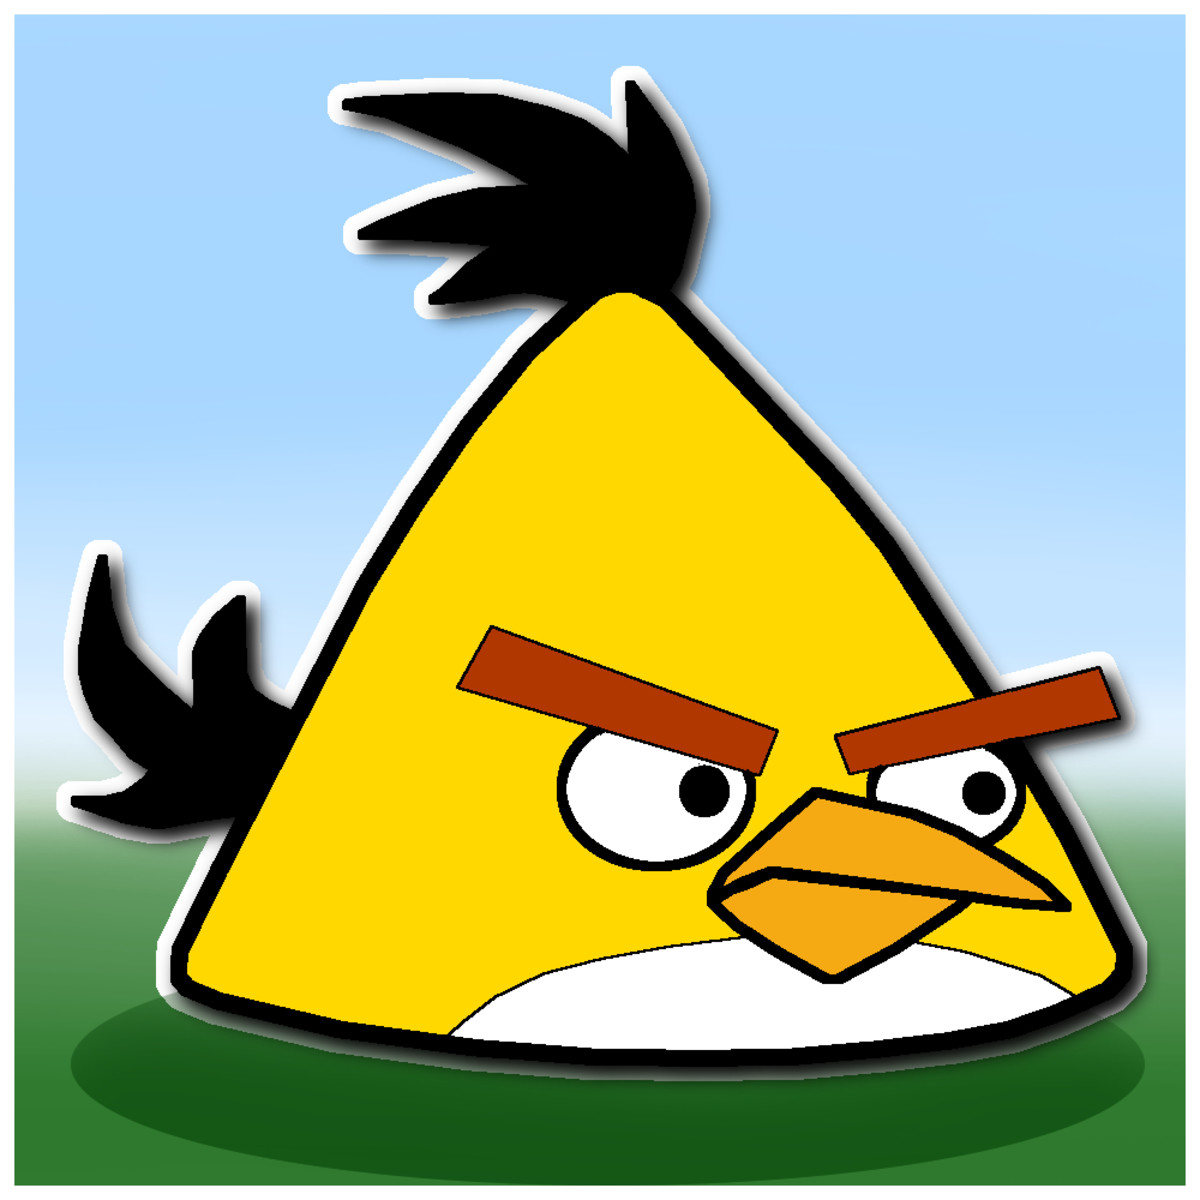 How to Draw an Angry Bird, "Yellow Bird" HubPages